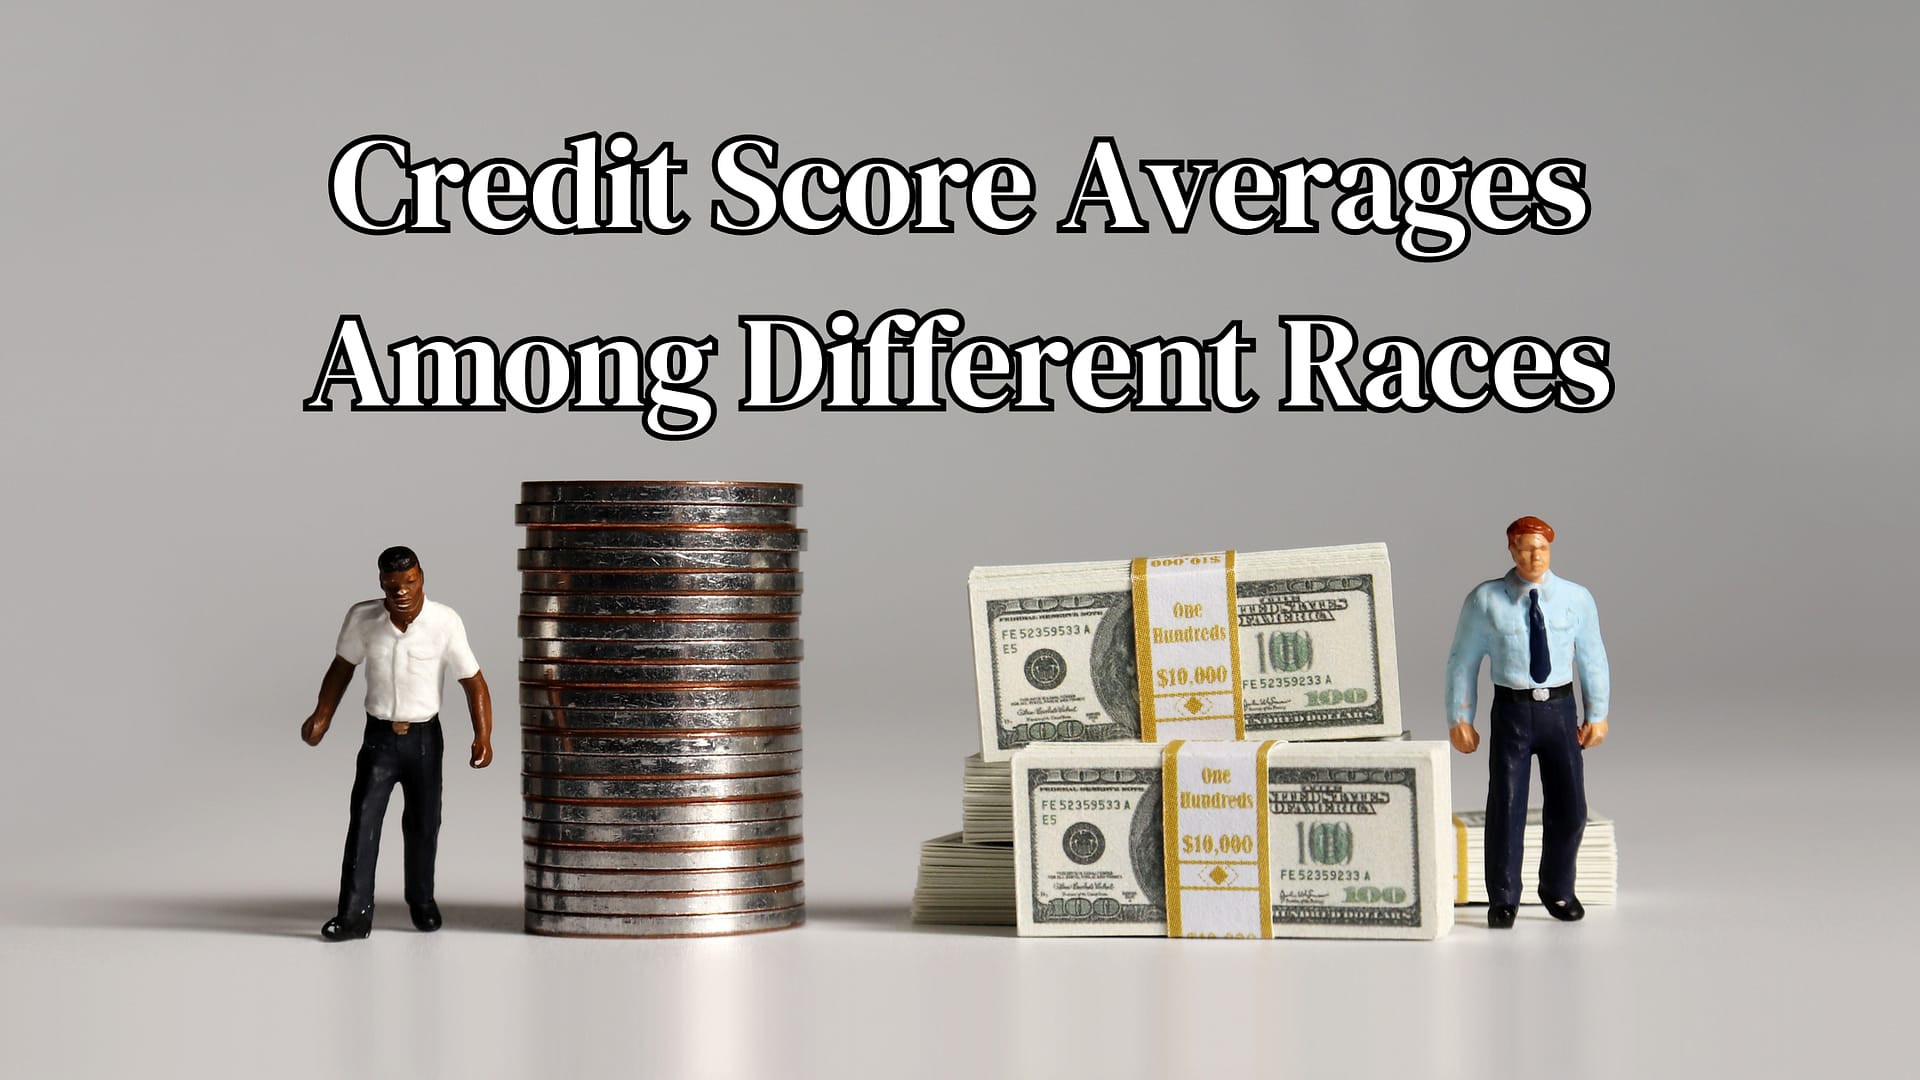 Credit Score Averages Among Different Races